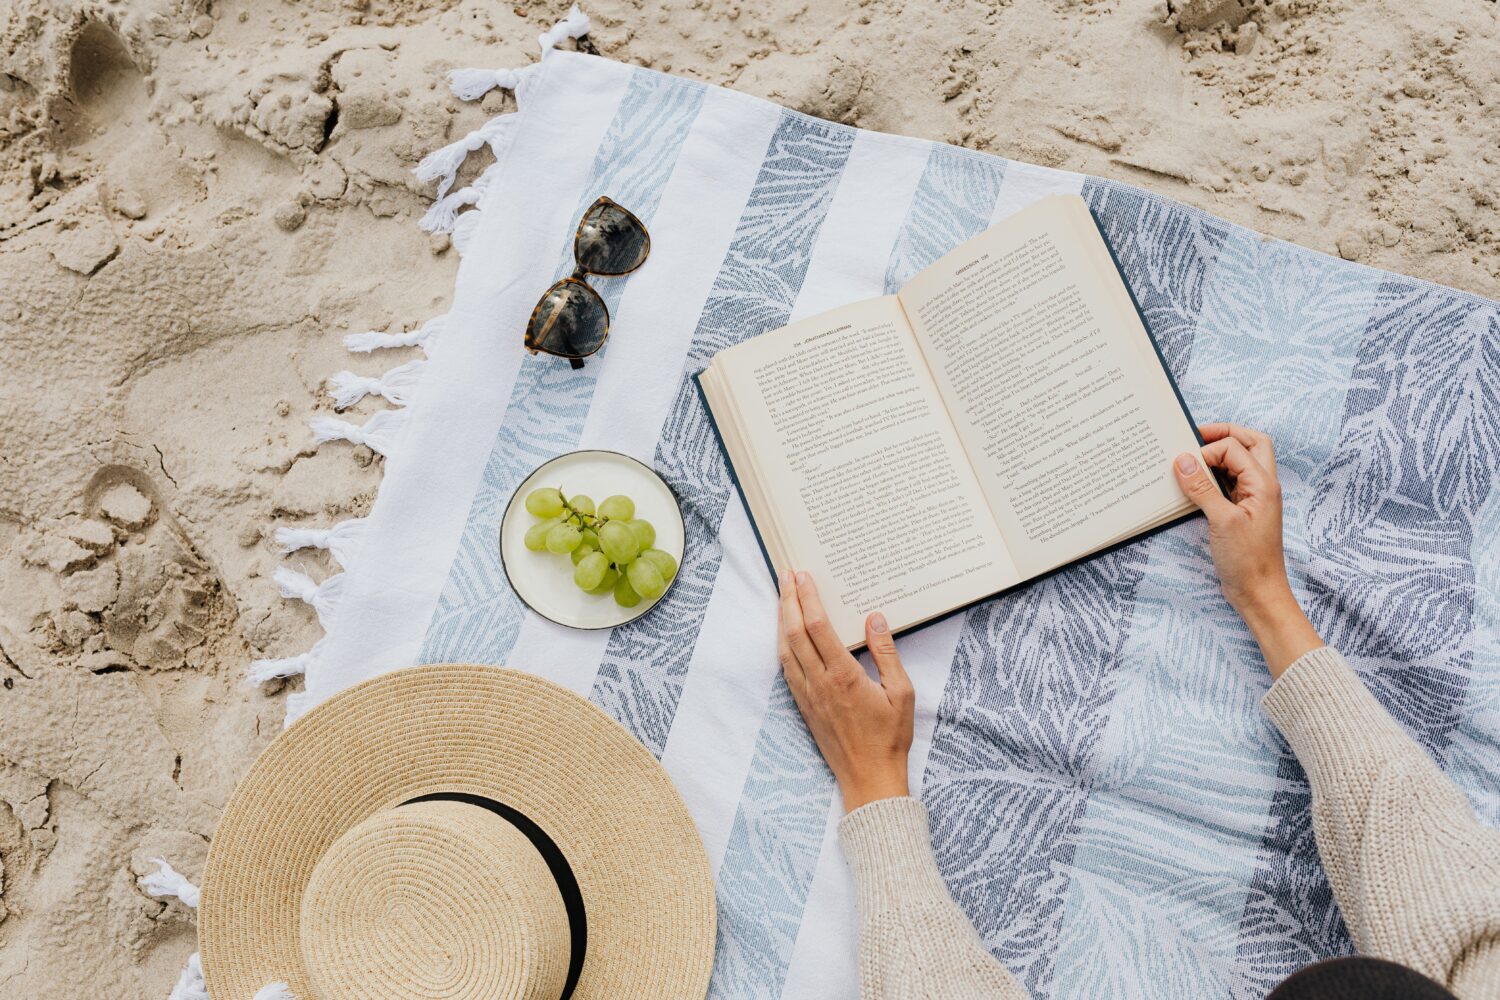 A book on a towel at the beach